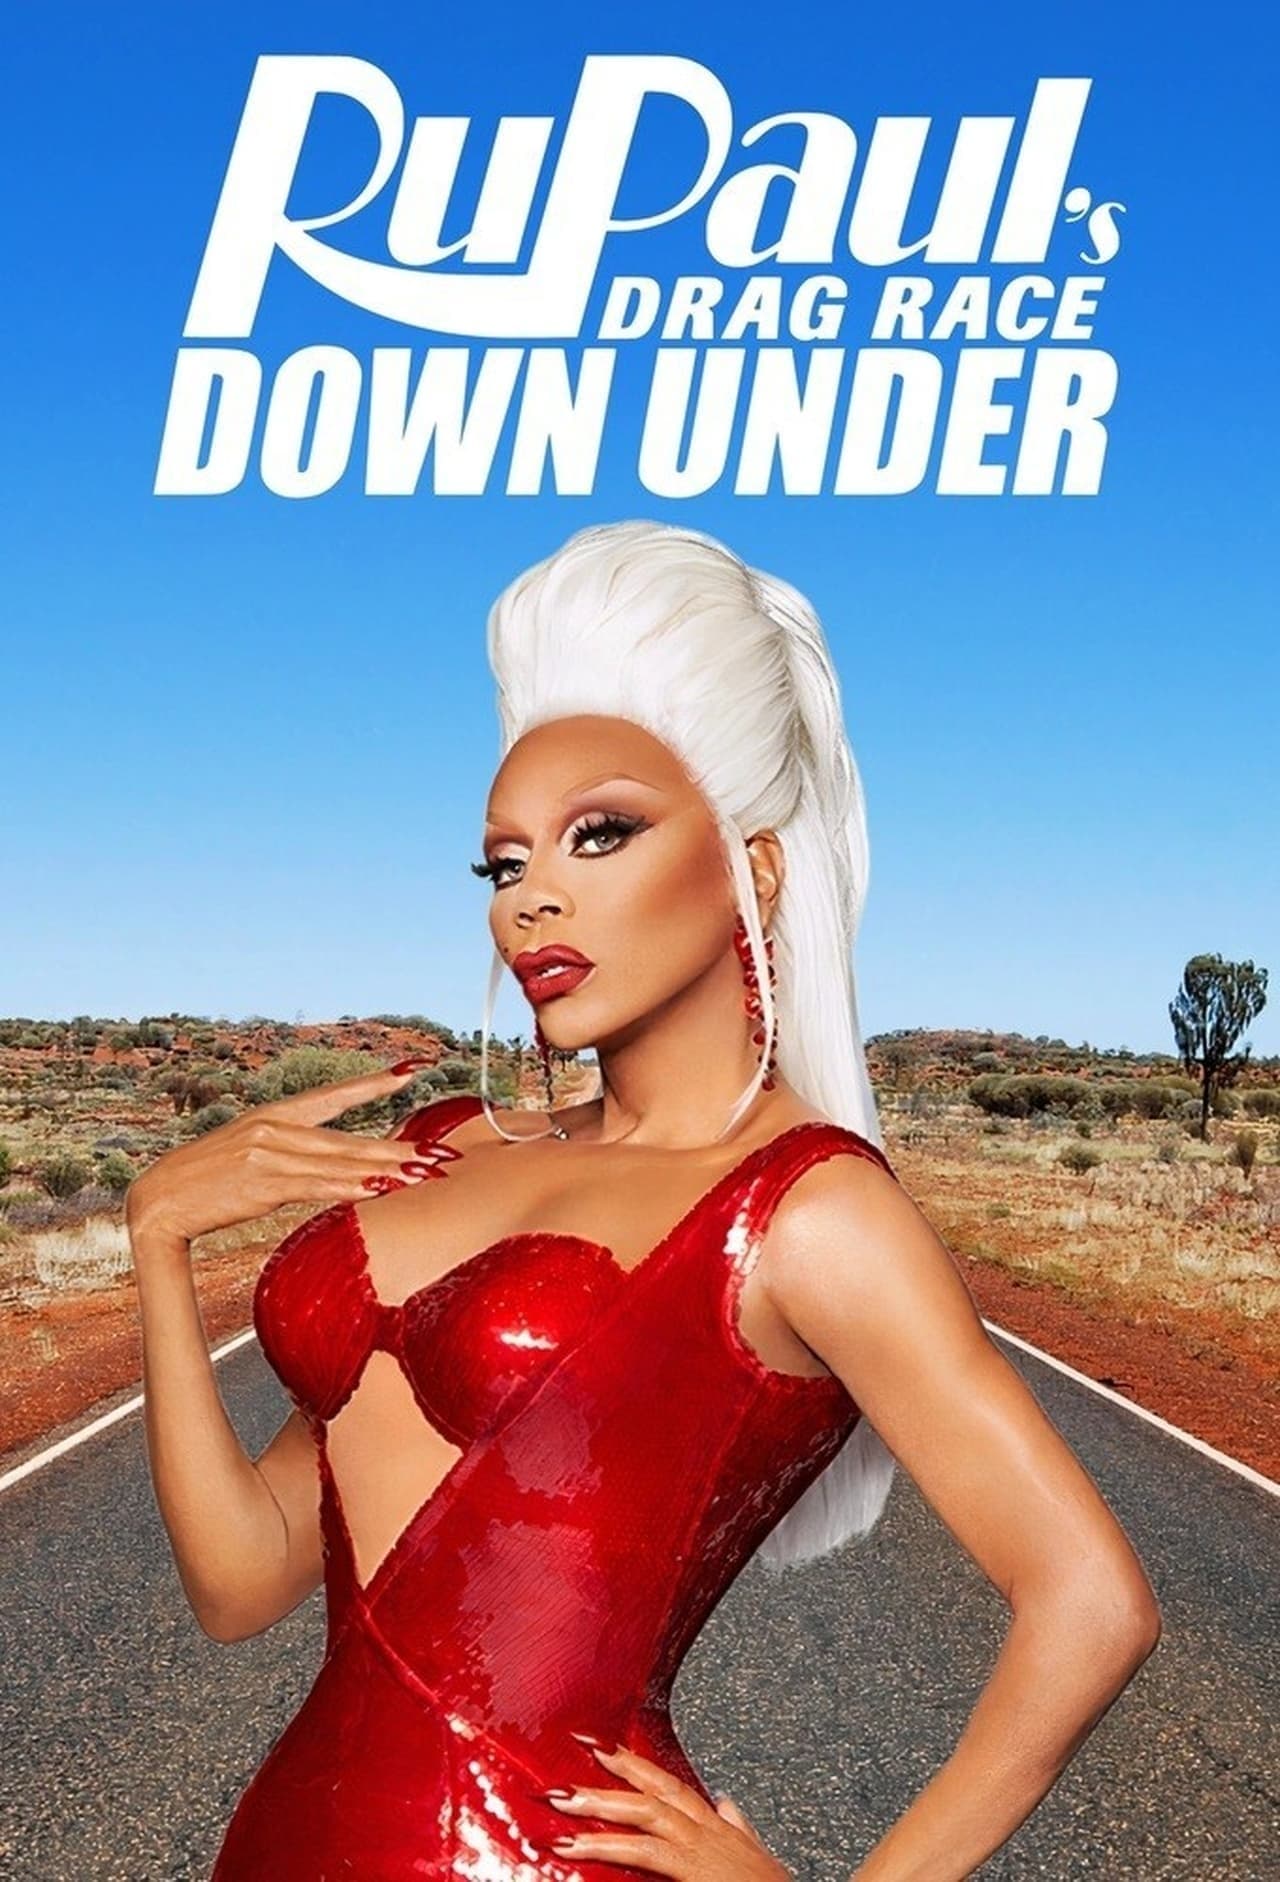 RuPaul's Drag Race Down Under TV Shows About Drag Queen